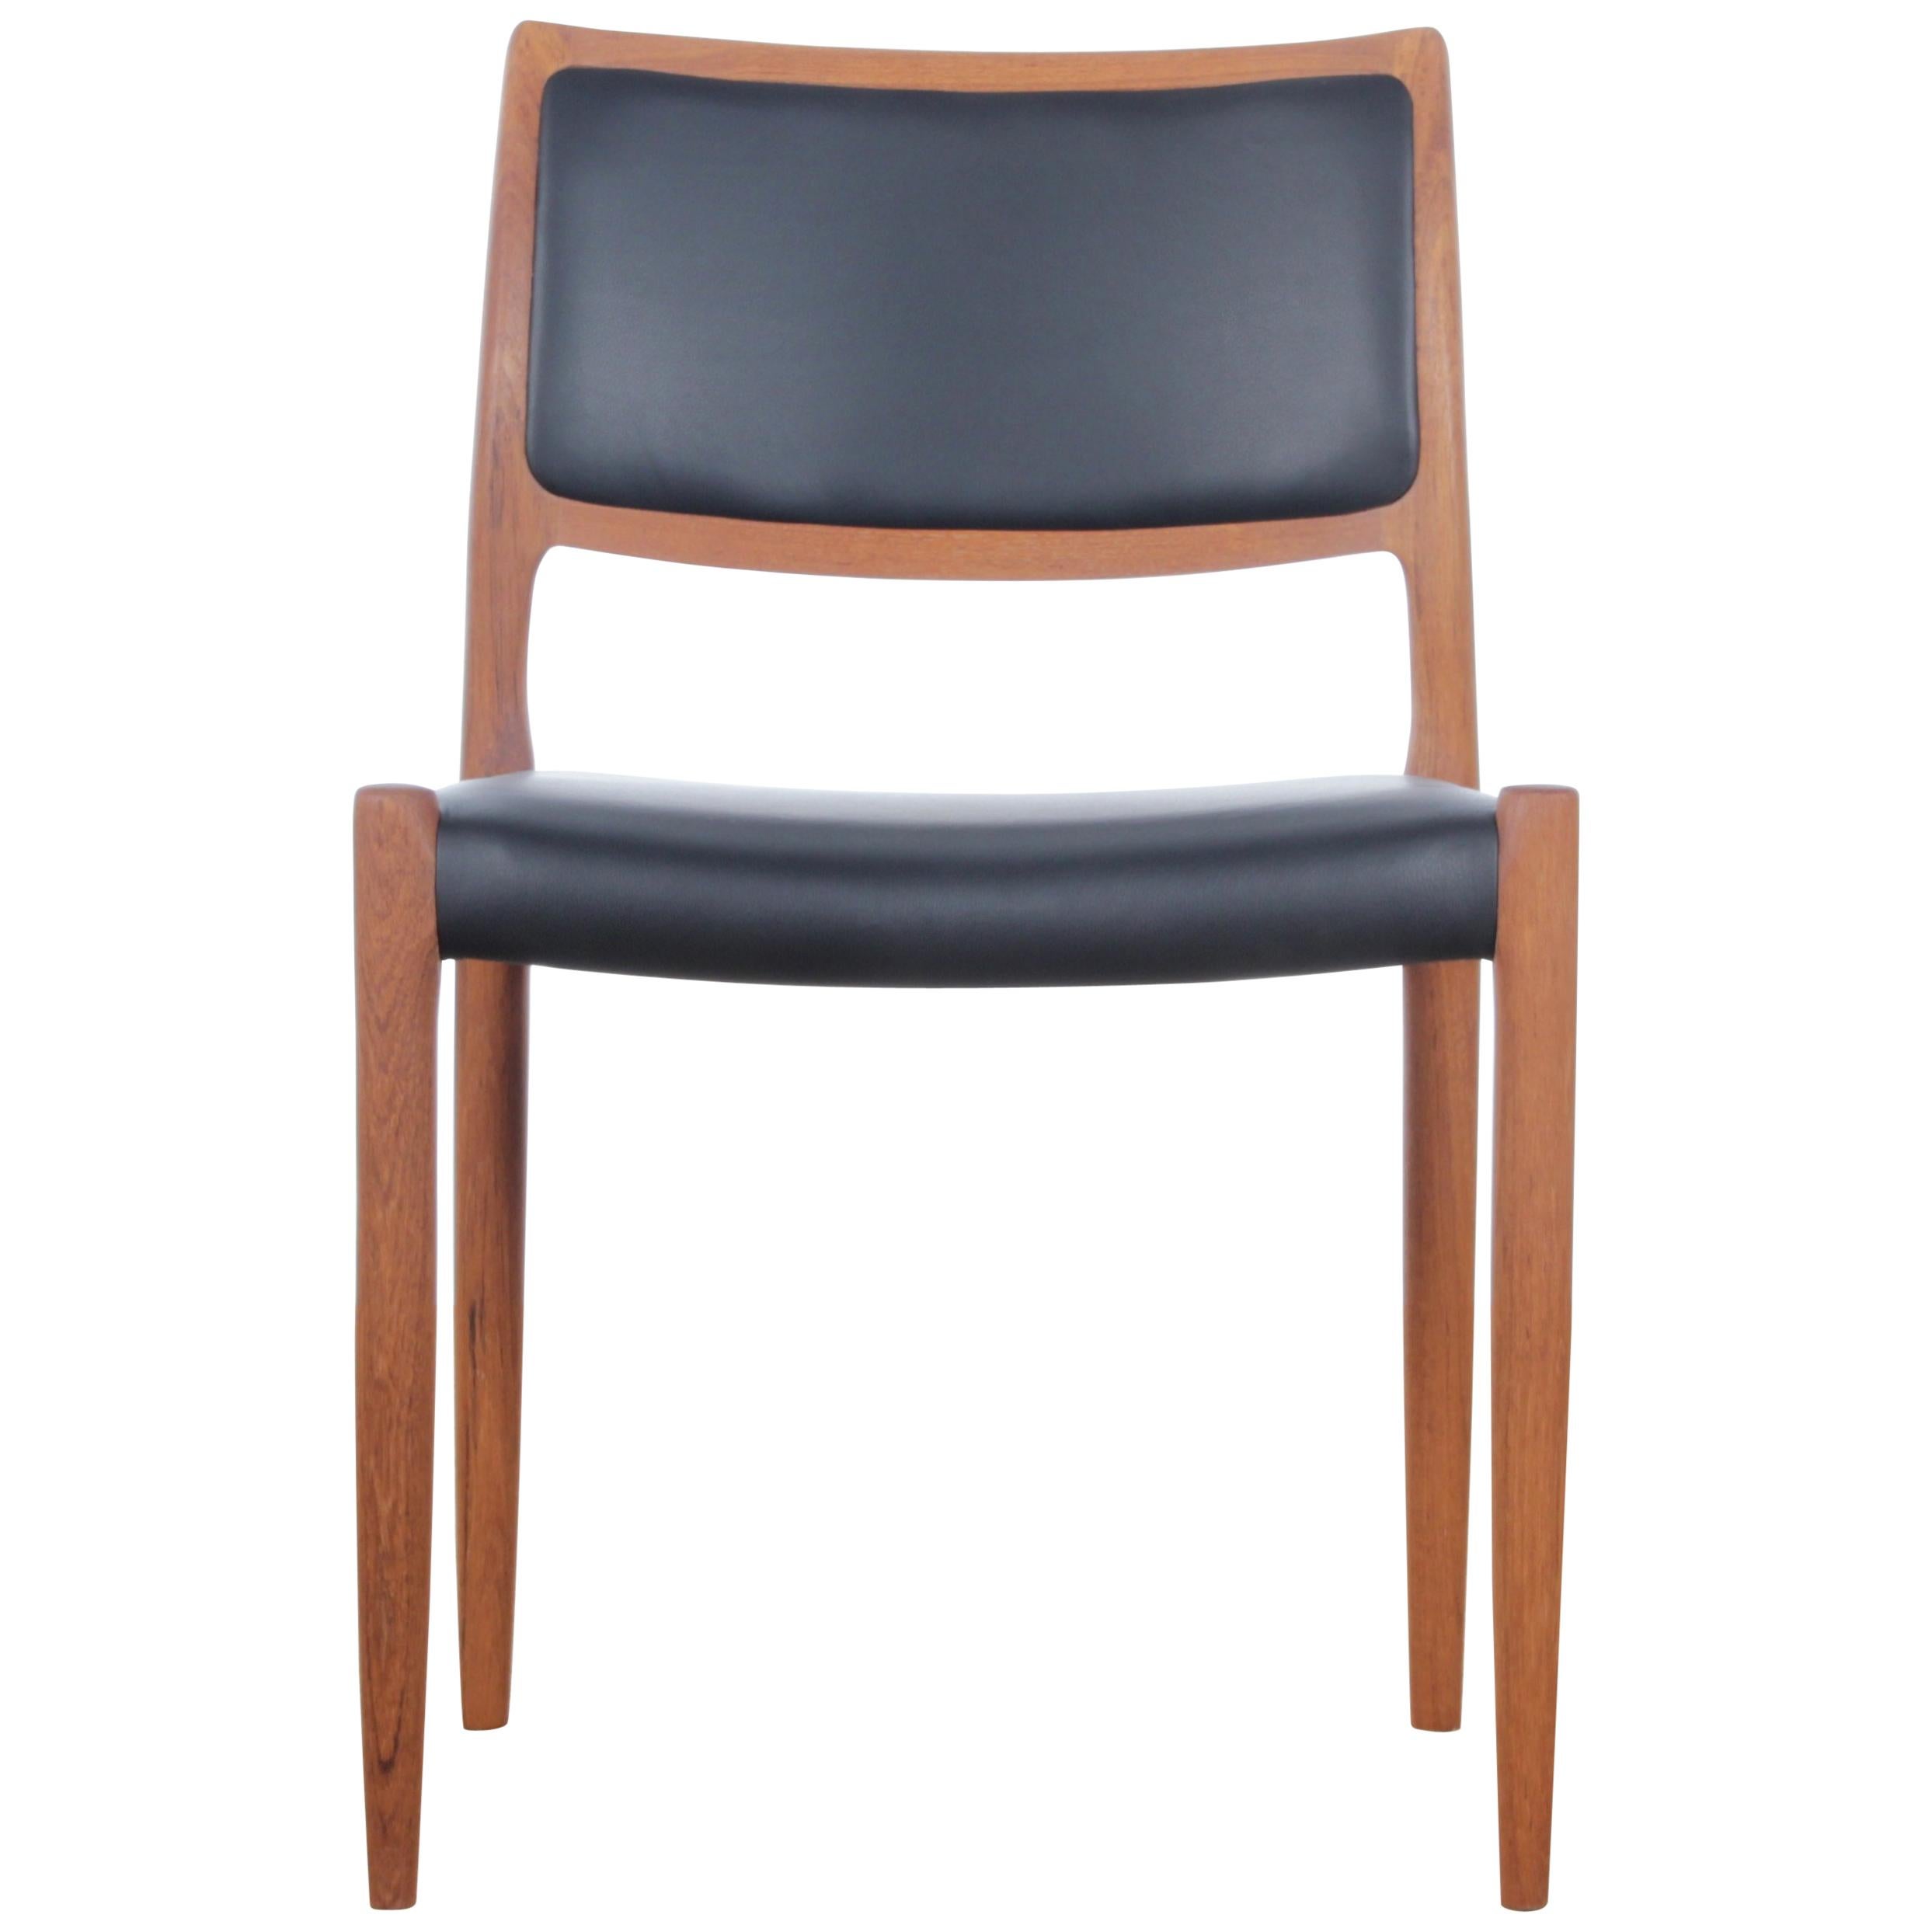 Mid-Century Modern Danish Chair Model 80 by Niels Møller, New Edition For Sale